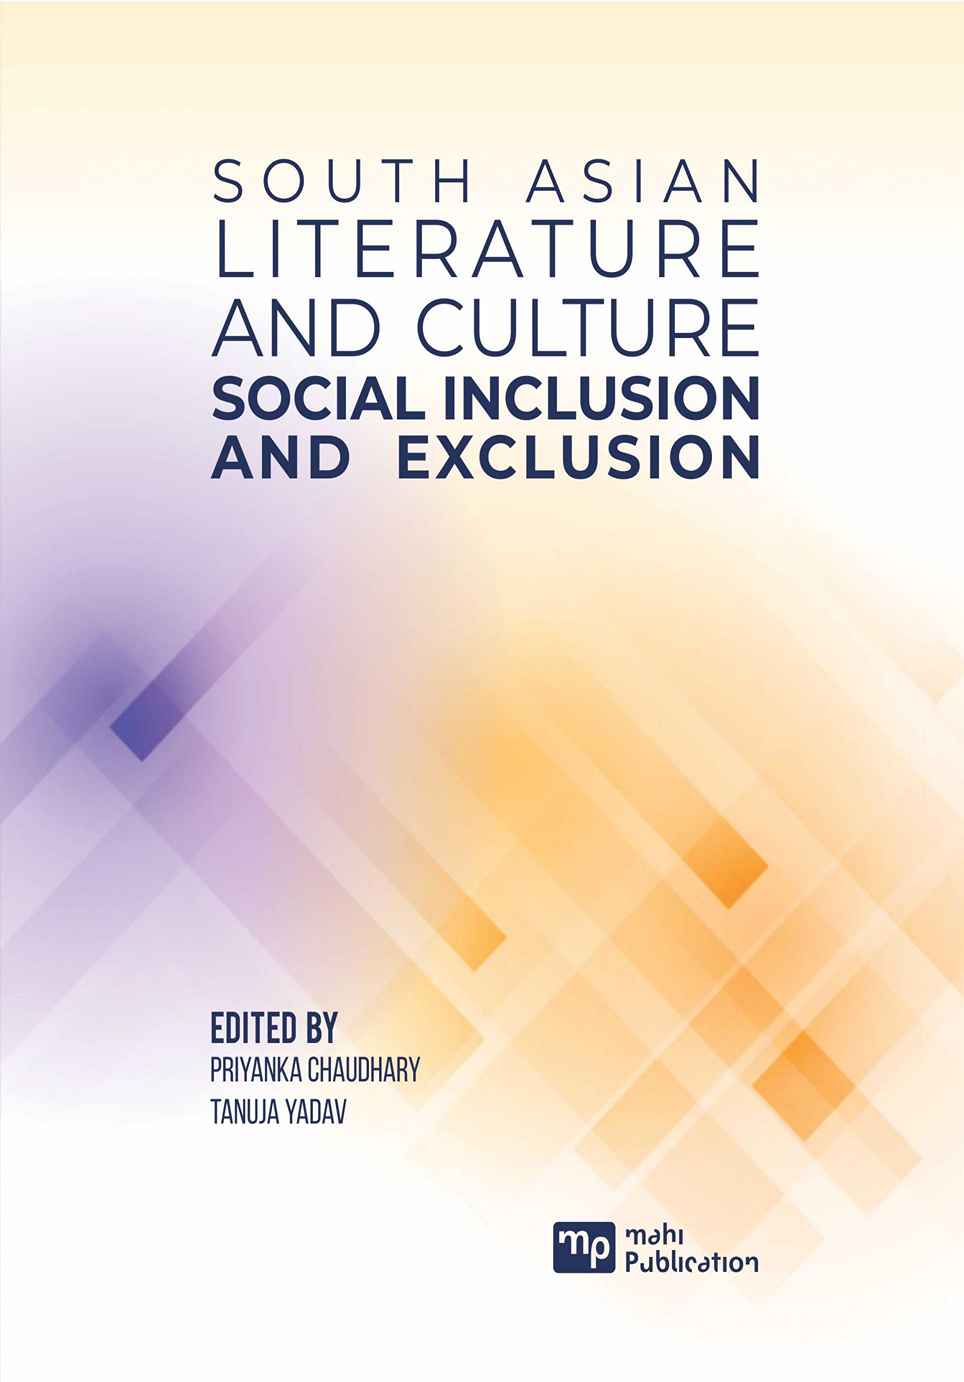 South Asian Literature And Culture: Social Inclusion And Exclusion